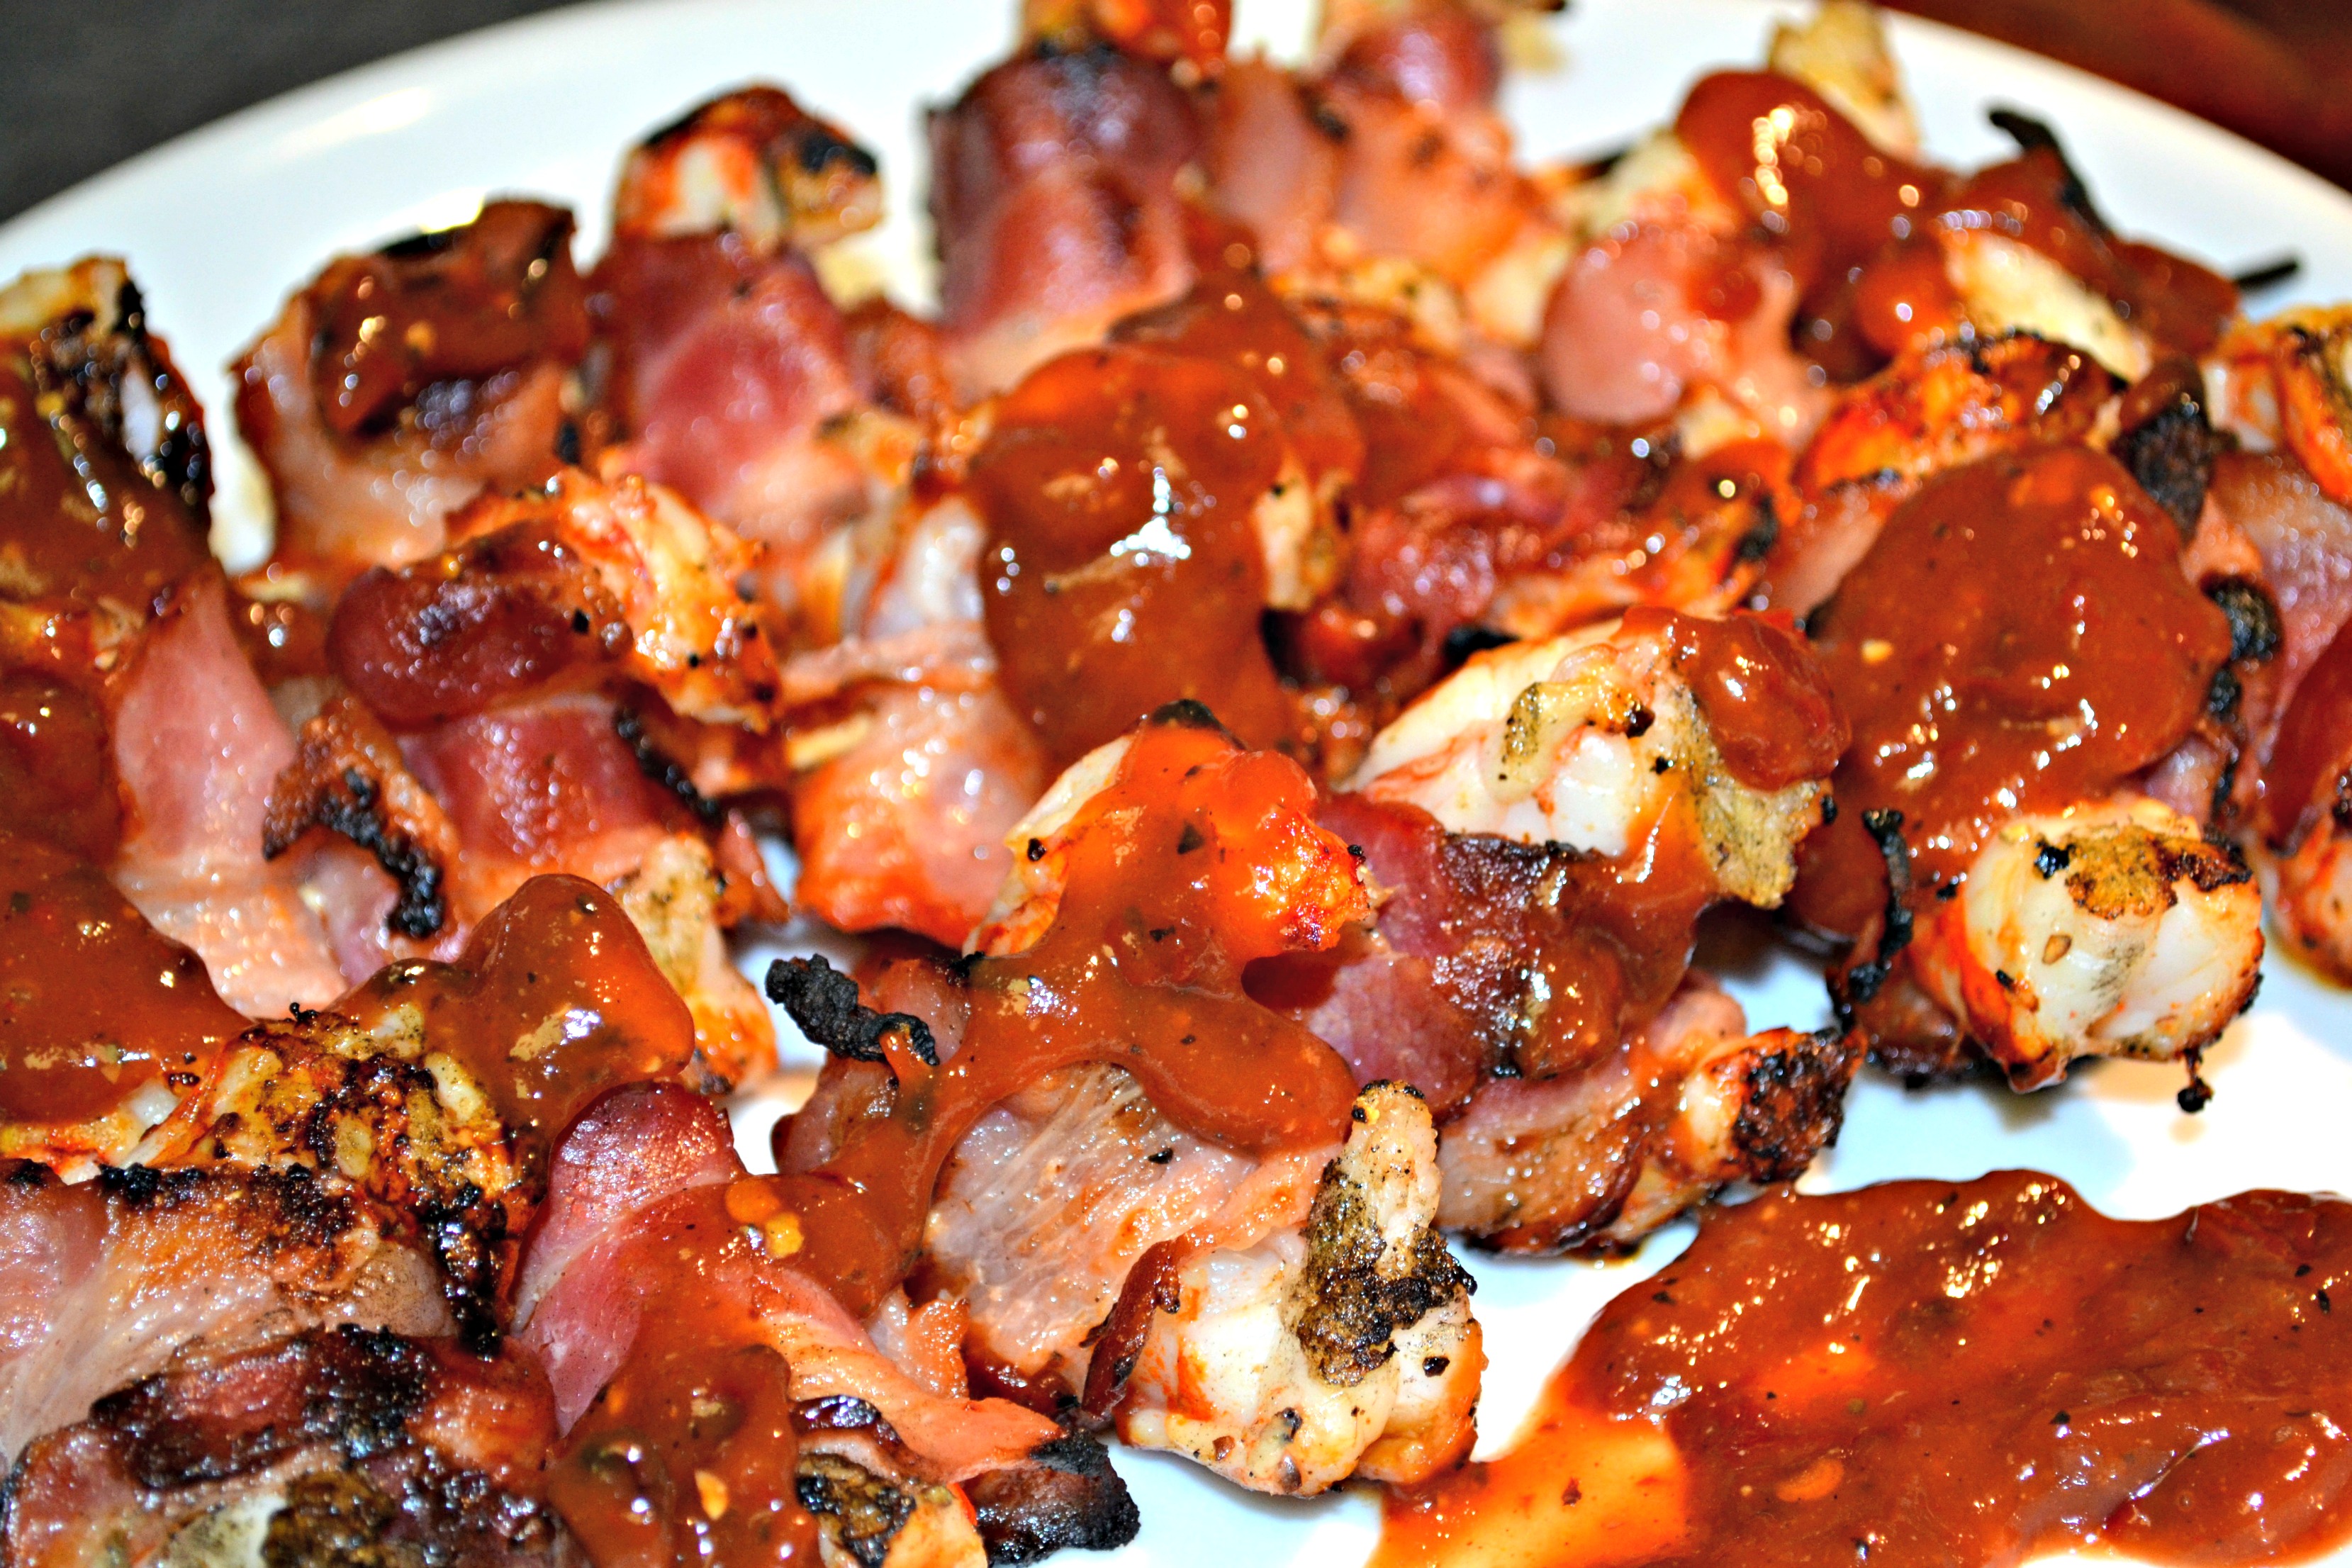 Applewood Smoked Bacon-Wrapped Shrimp with a Chipotle BBQ Sauce